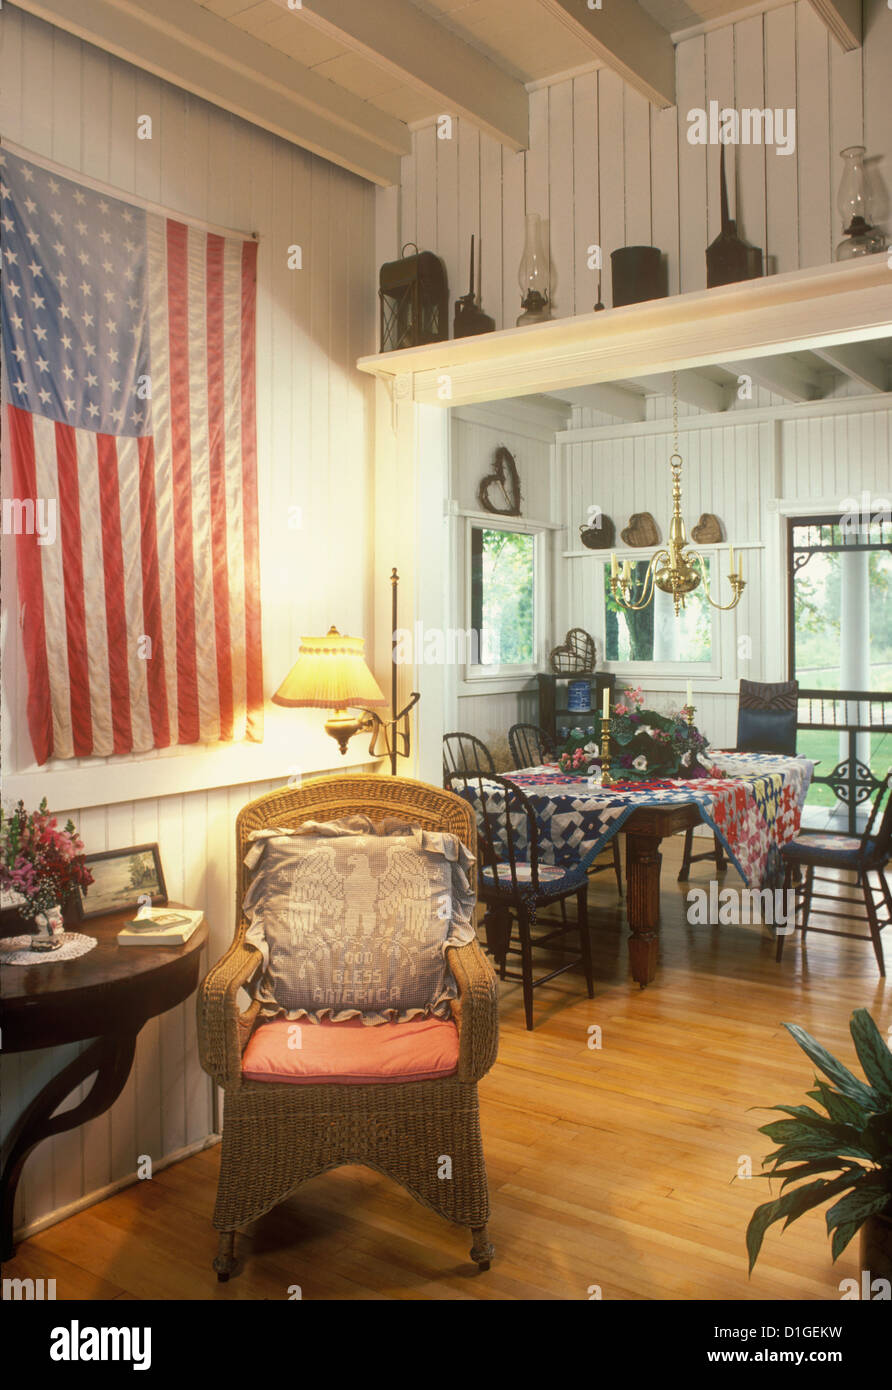 EATING AREAS Summer country home dining area flag hung on wall wicker chair wood walls quilt tablecloth country style charming Stock Photo